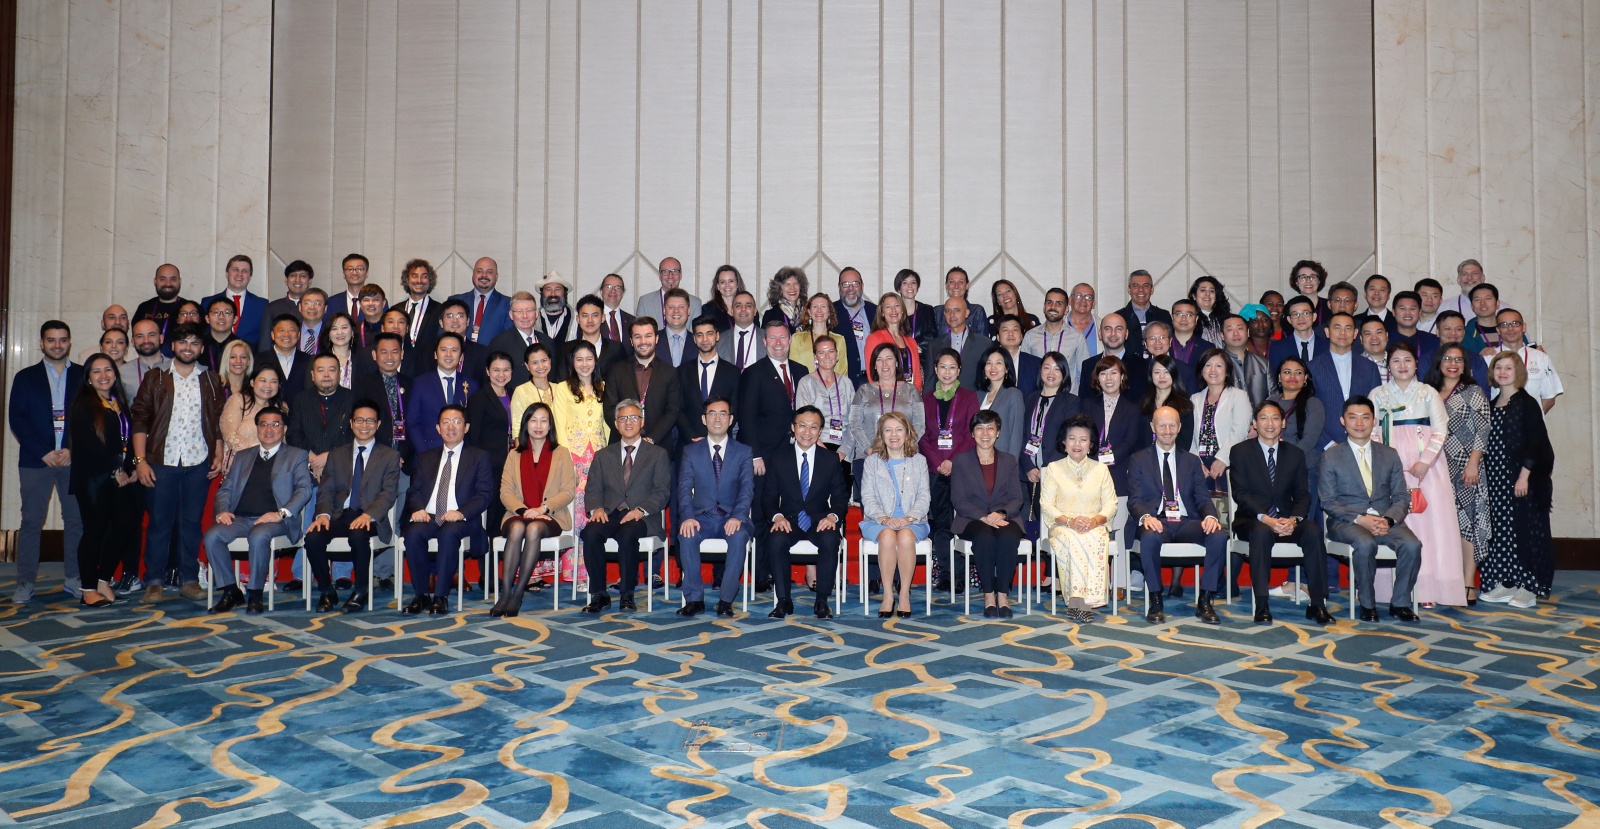 The “International Gastronomy Forum, Macao 2019” opens with a record number of UNESCO Creative Cities of Gastronomy participants from around the world